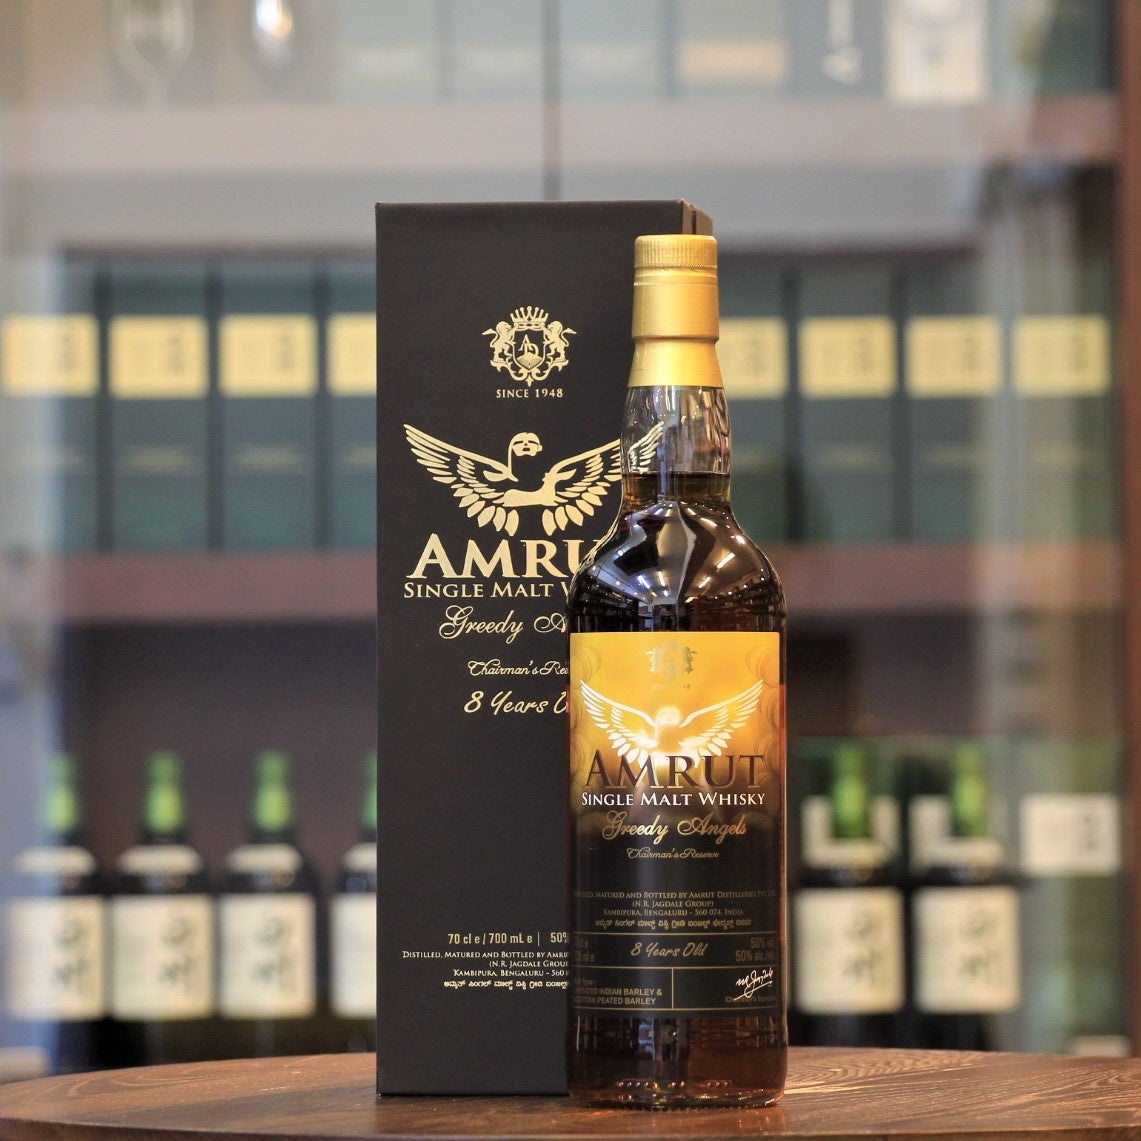 Amrut Greedy Angels Chairman's Reserve 8 Years Old Indian Single Malt Whisky